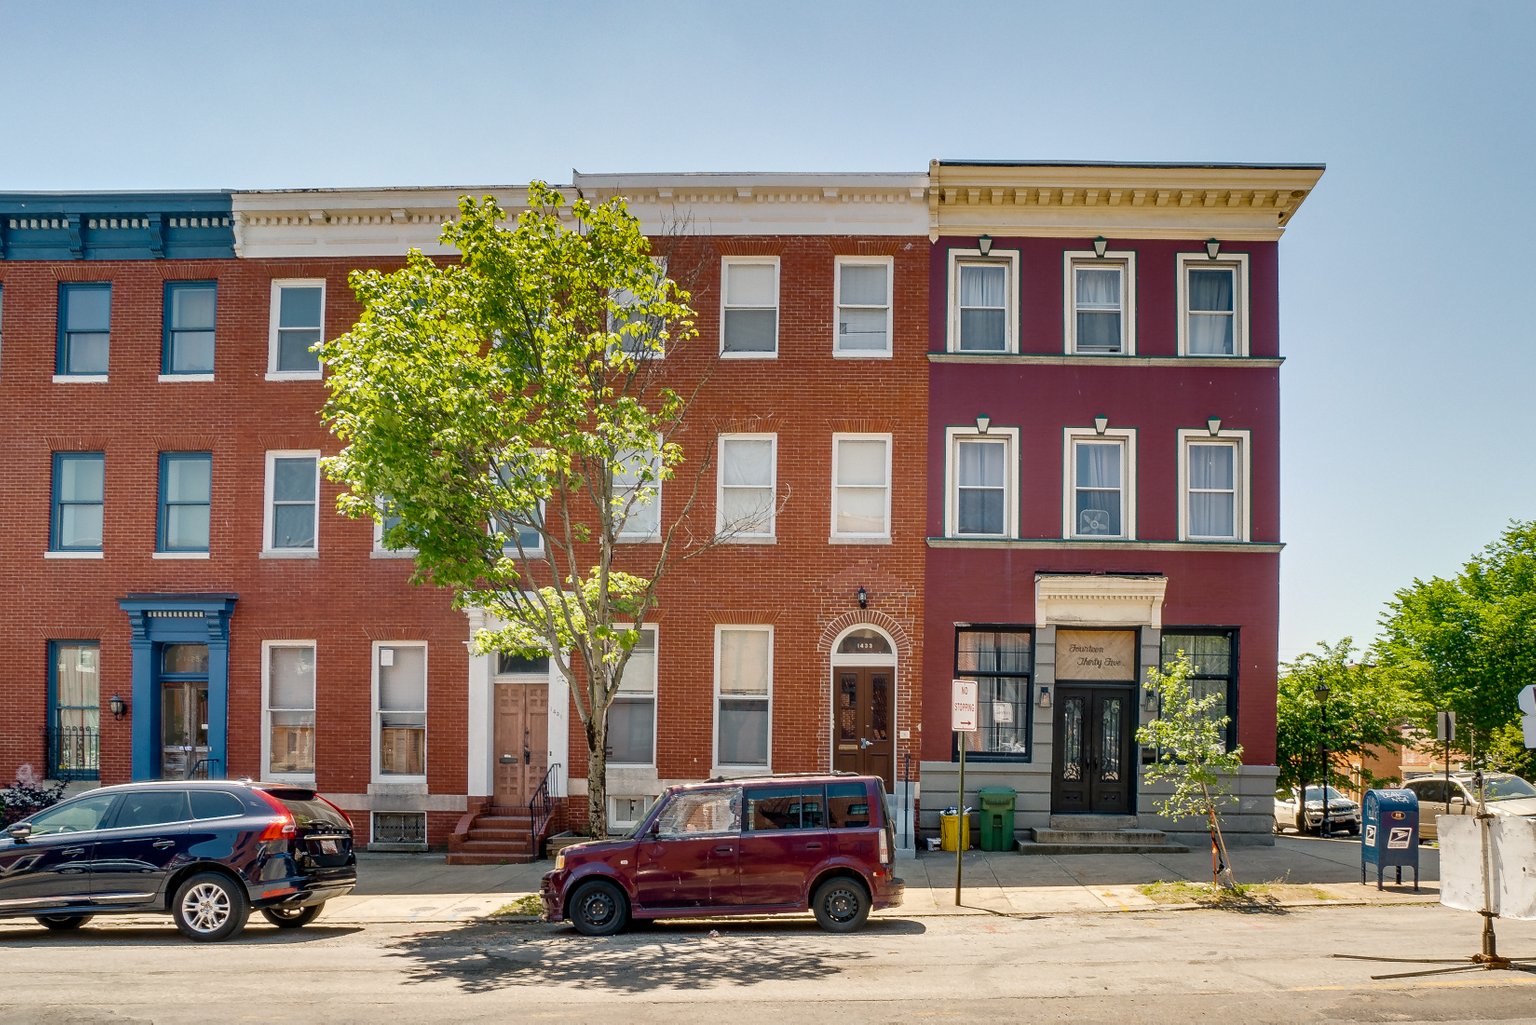 1433 W. Lombard St: 4 Apartments/ Recent Renovation/ Fully Leased